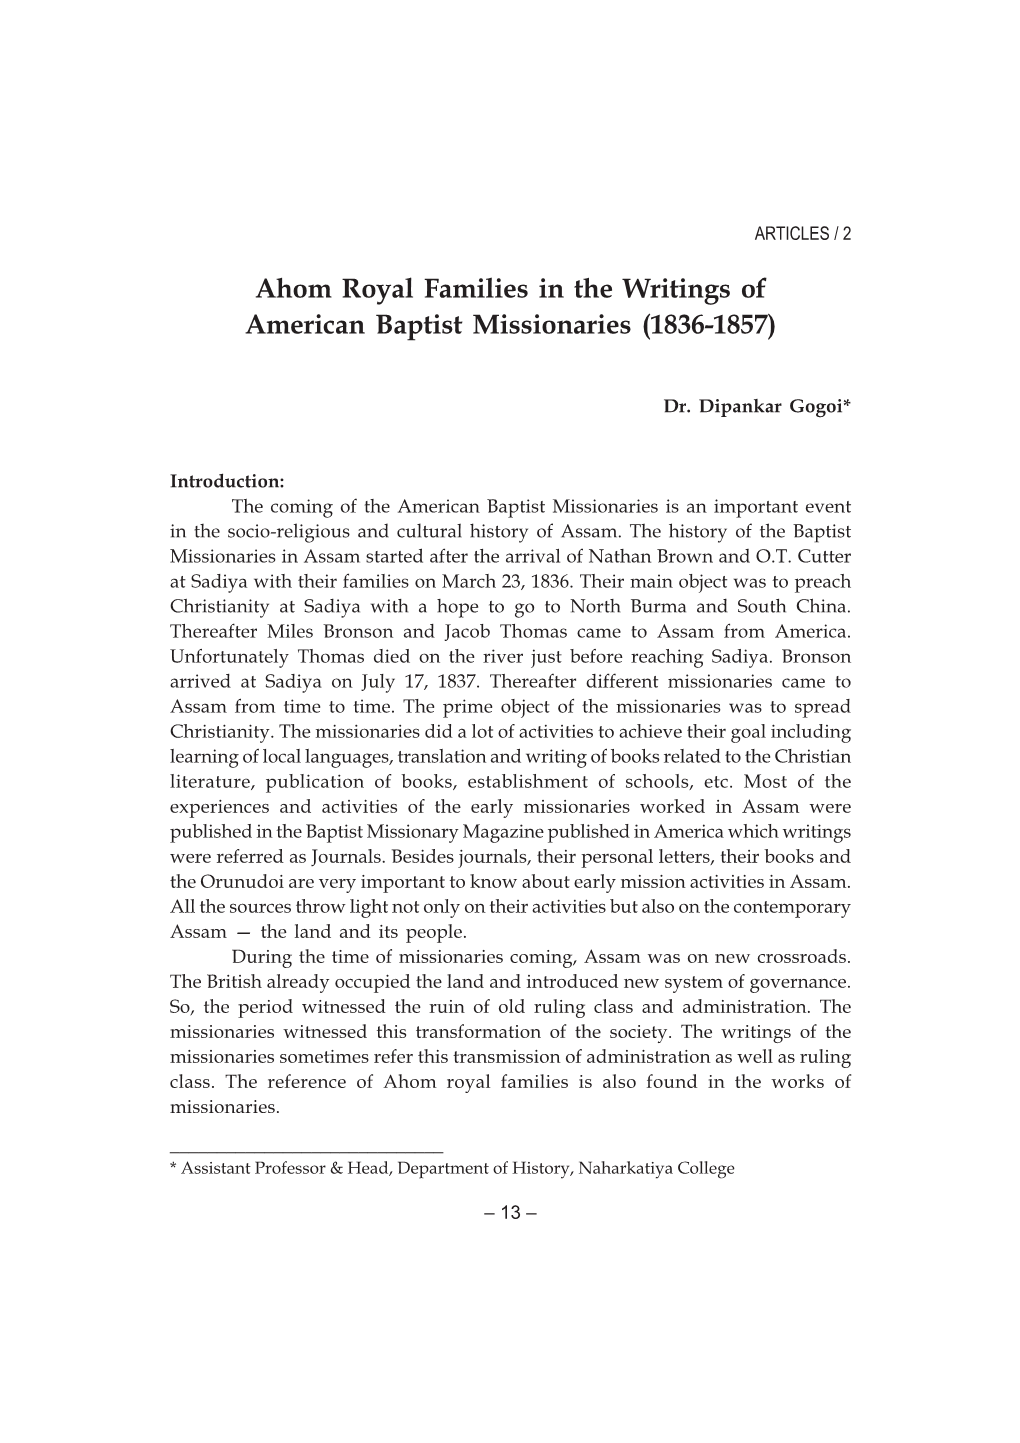 Ahom Royal Families in the Writings of American Baptist Missionaries (1836-1857)